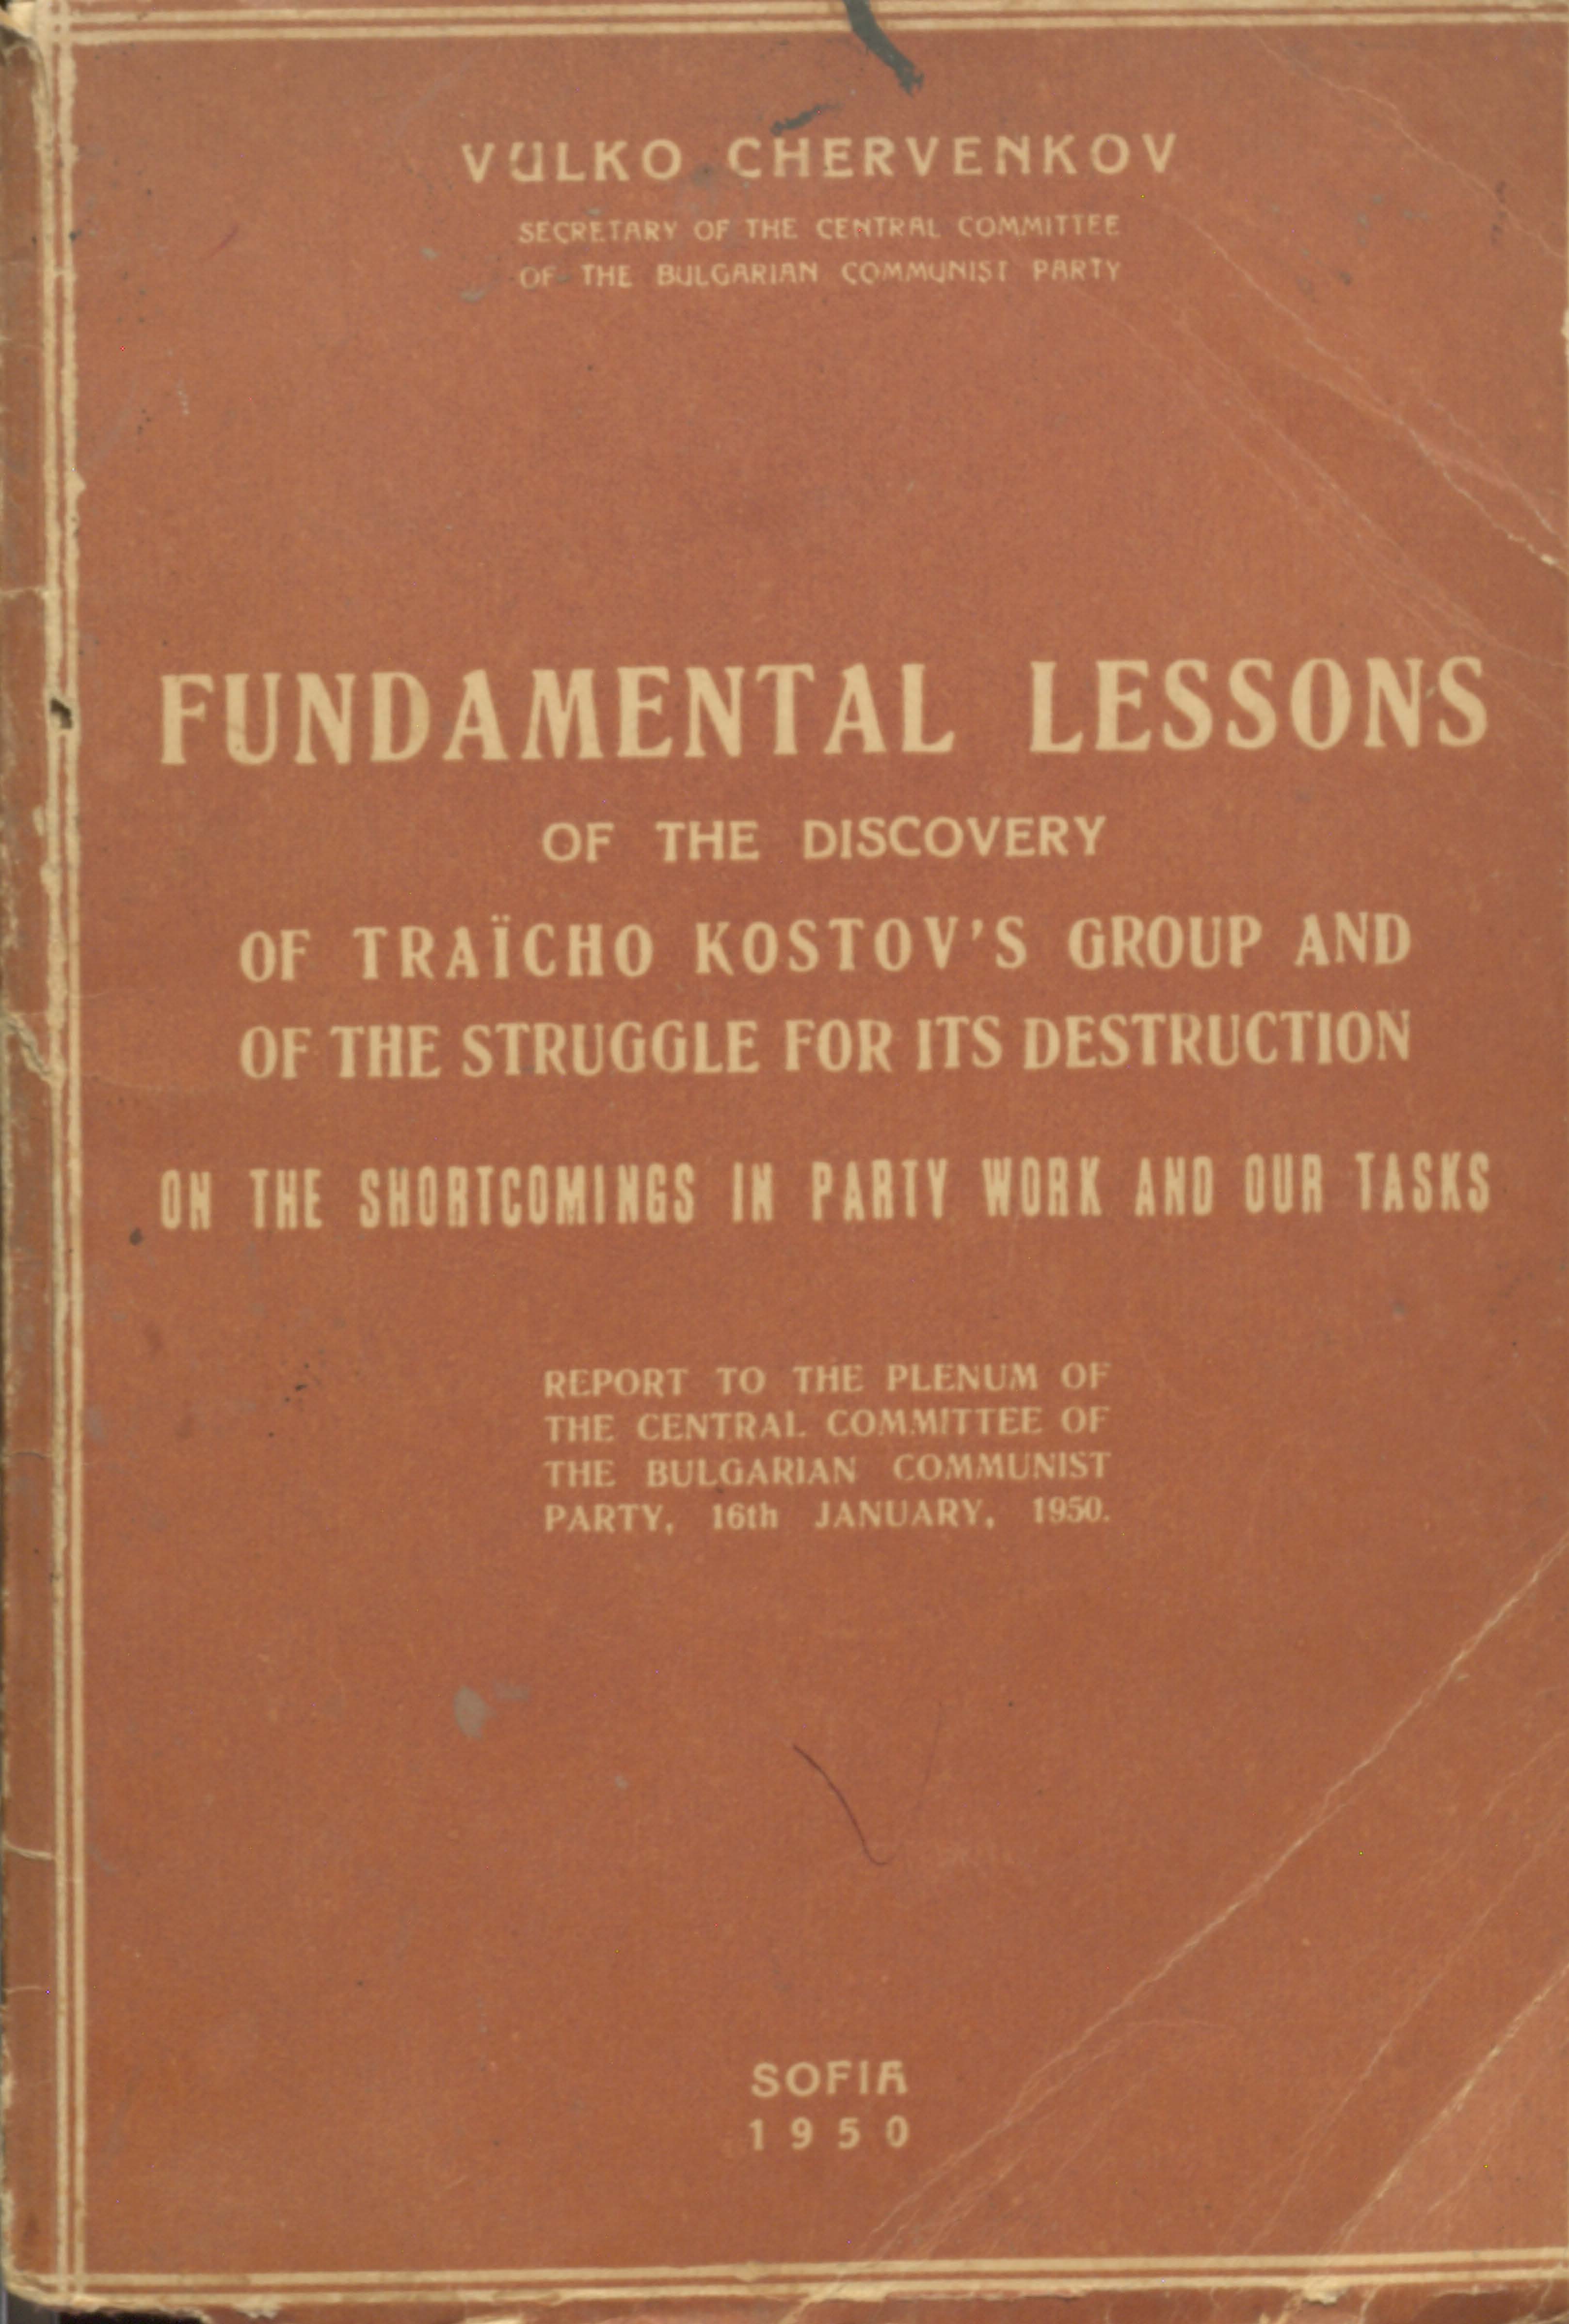 Fundamental lessons of the discovery